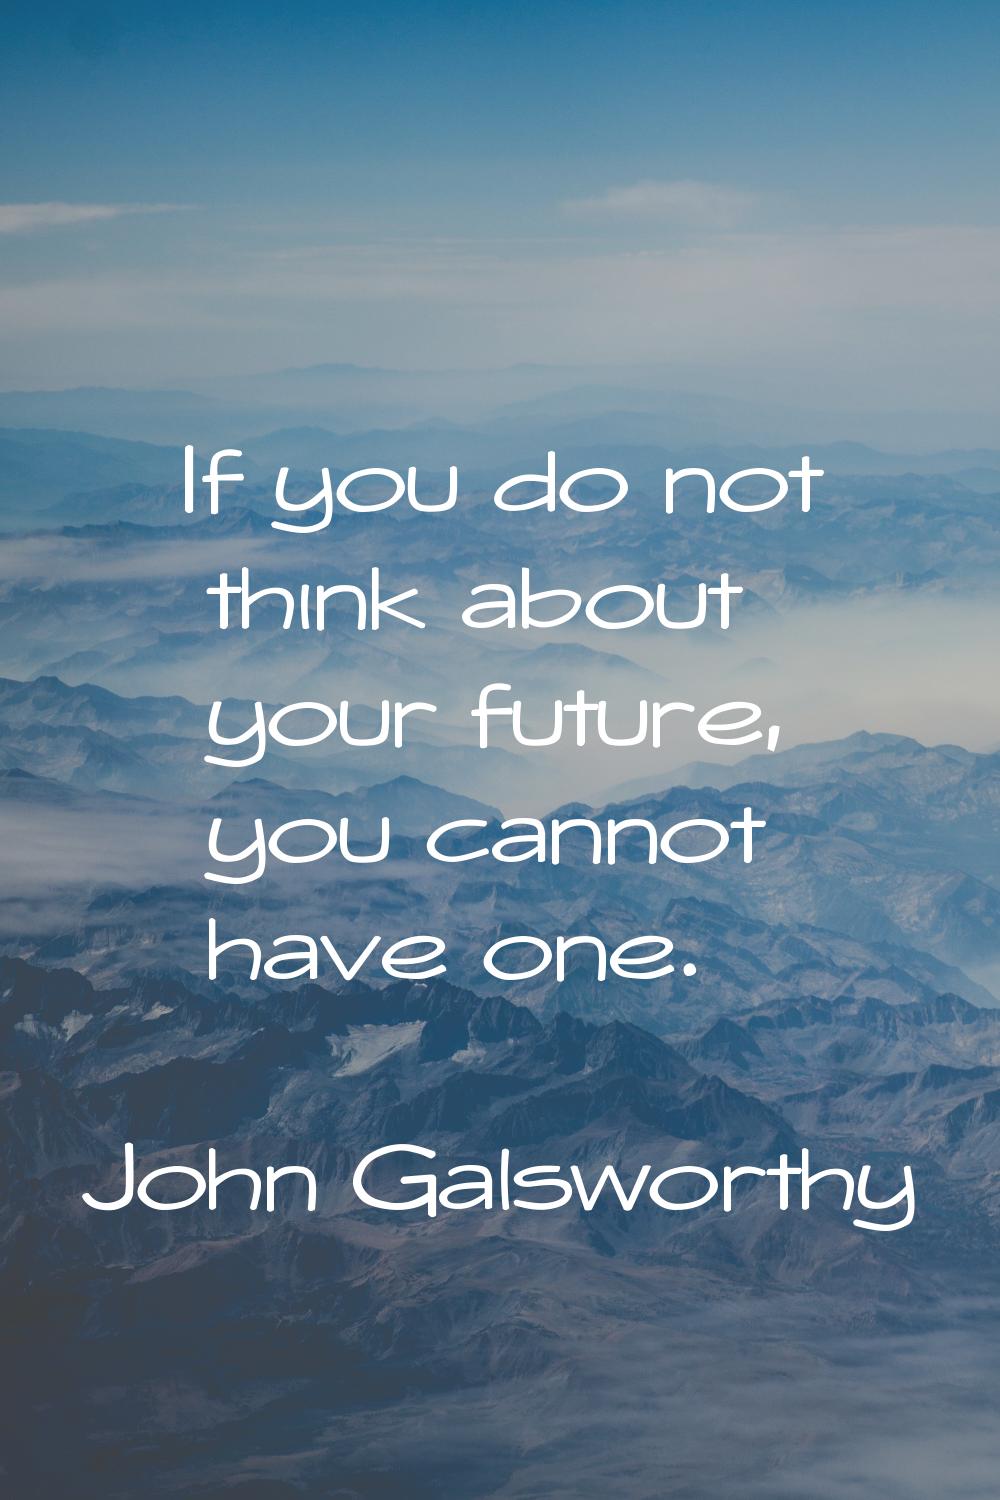 If you do not think about your future, you cannot have one.